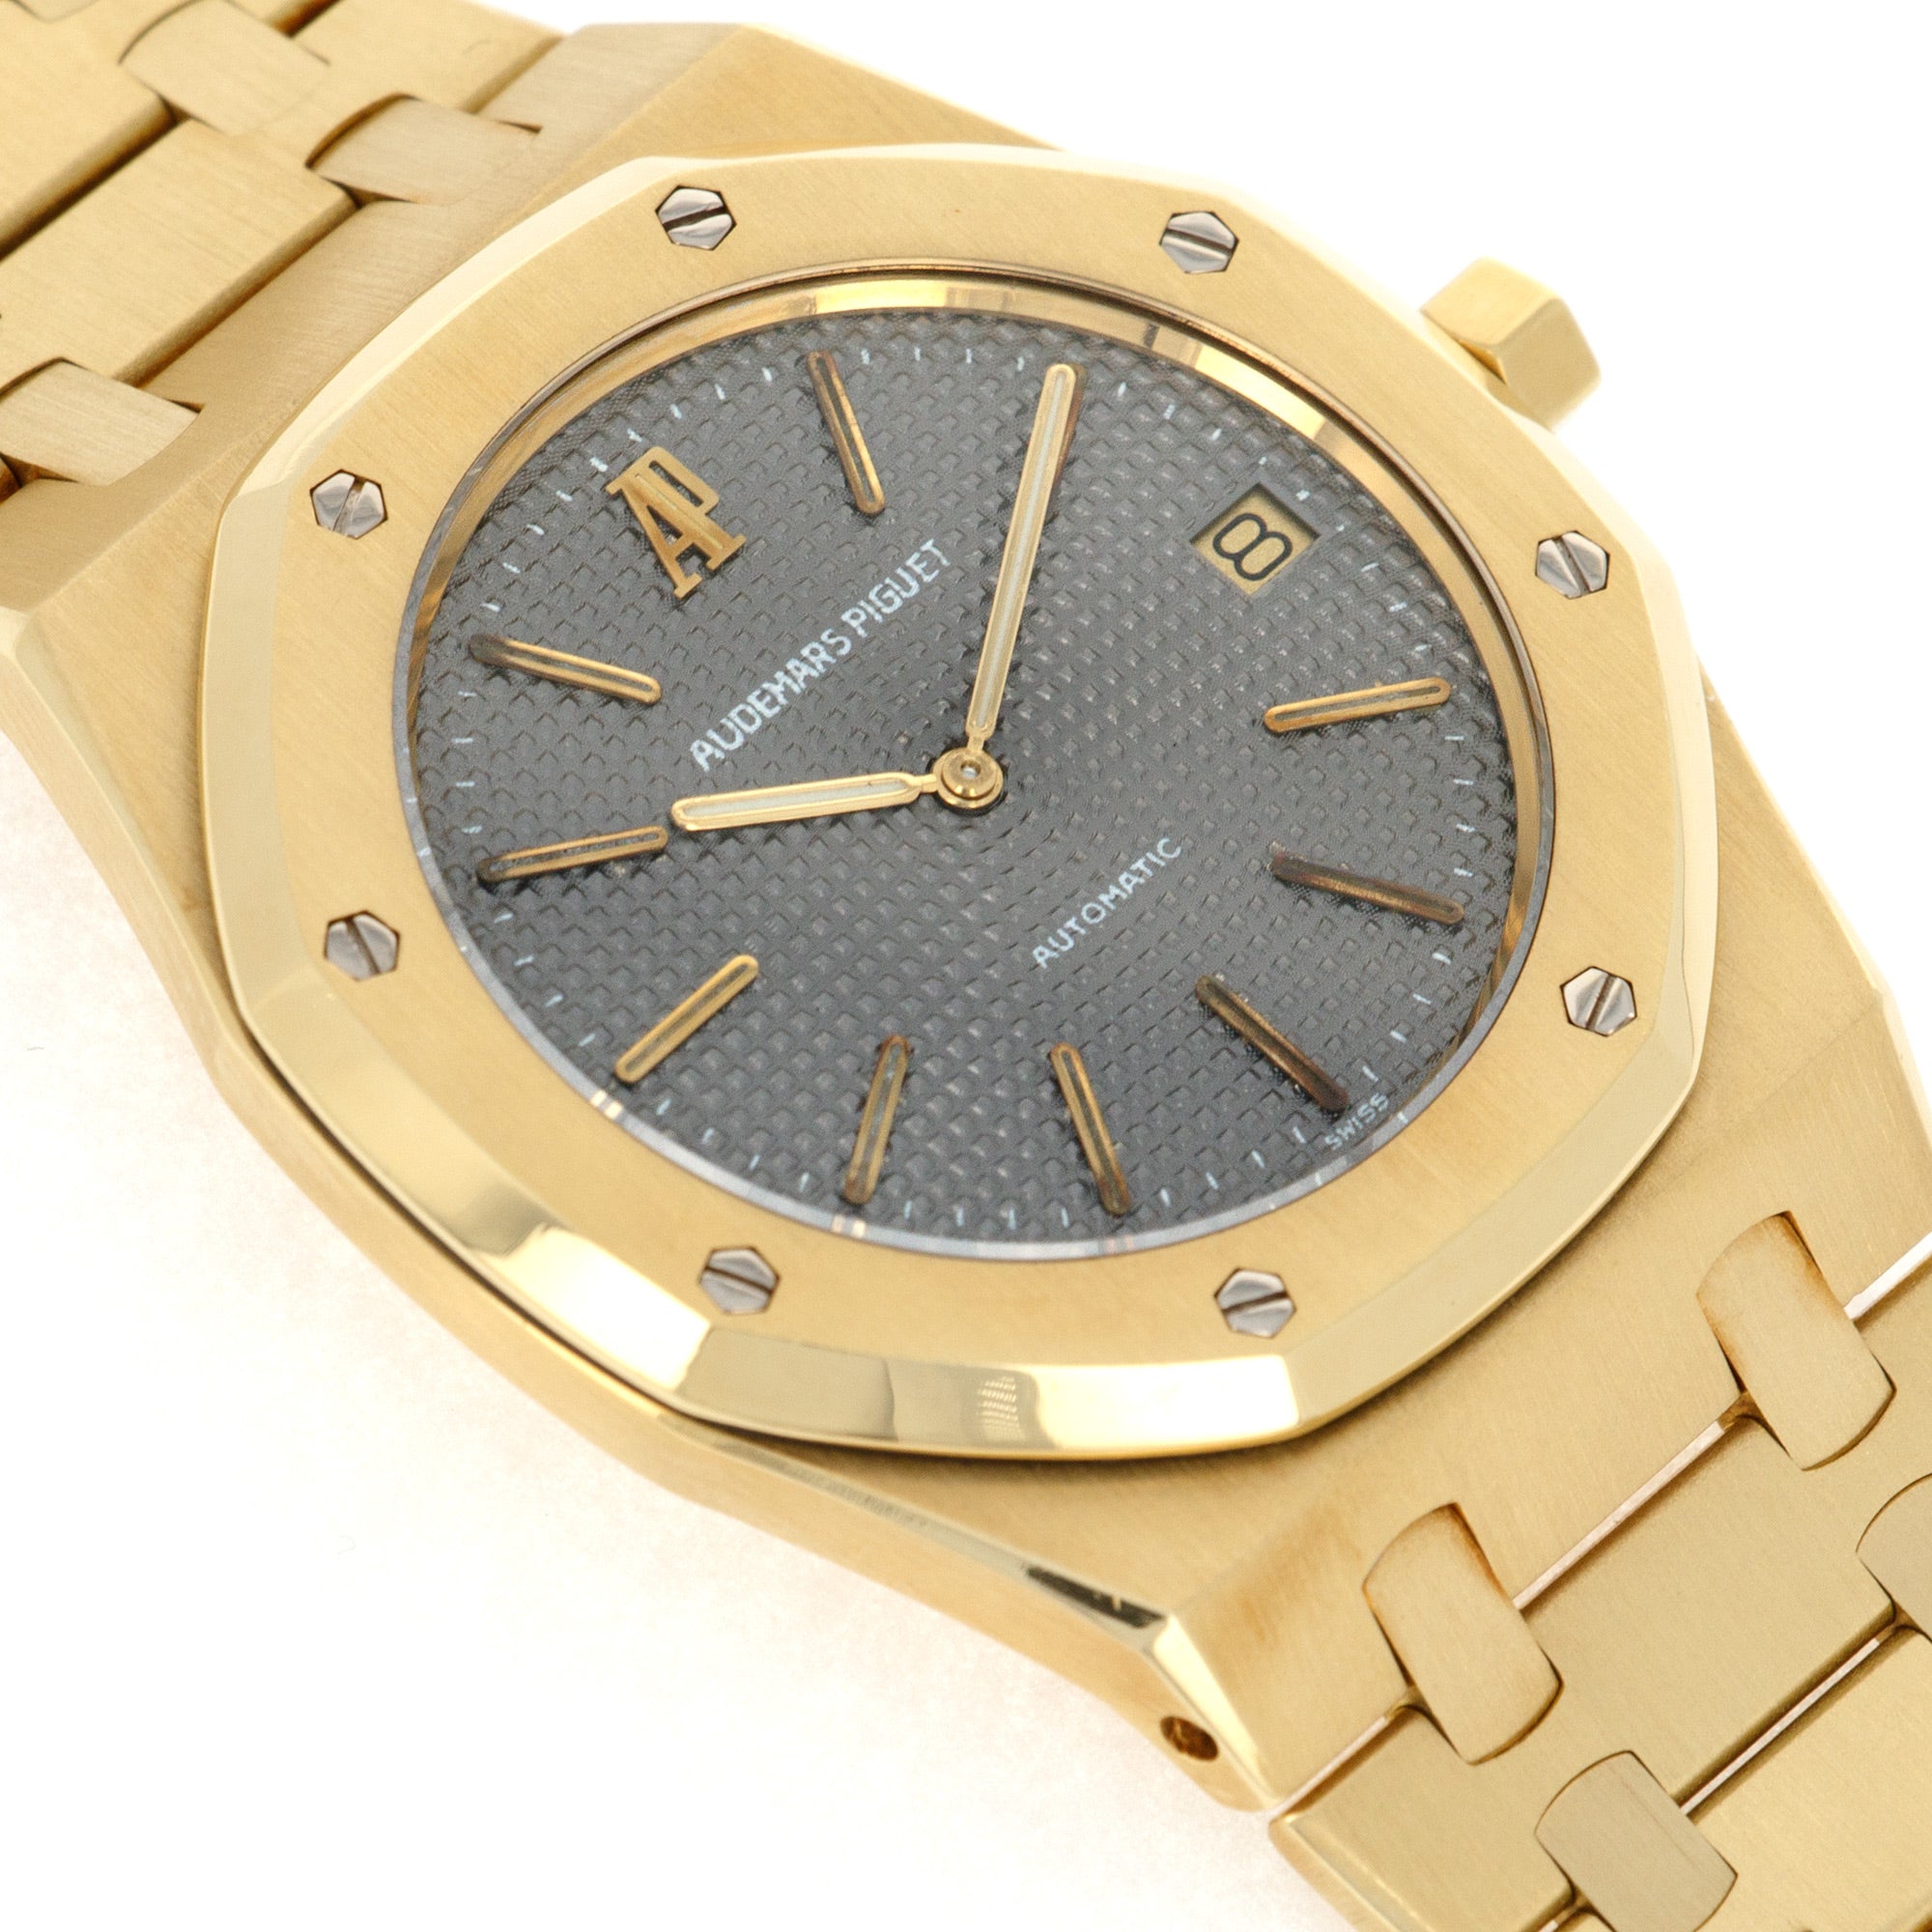 Audemars Piguet Royal Oak 5402BA 18k YG  Excellent Overall Condition, No Notable Signs of Wear Unisex 18k YG Grey 39 mm Automatic Yellow Gold (7.5) Handmade Travel Pouch 